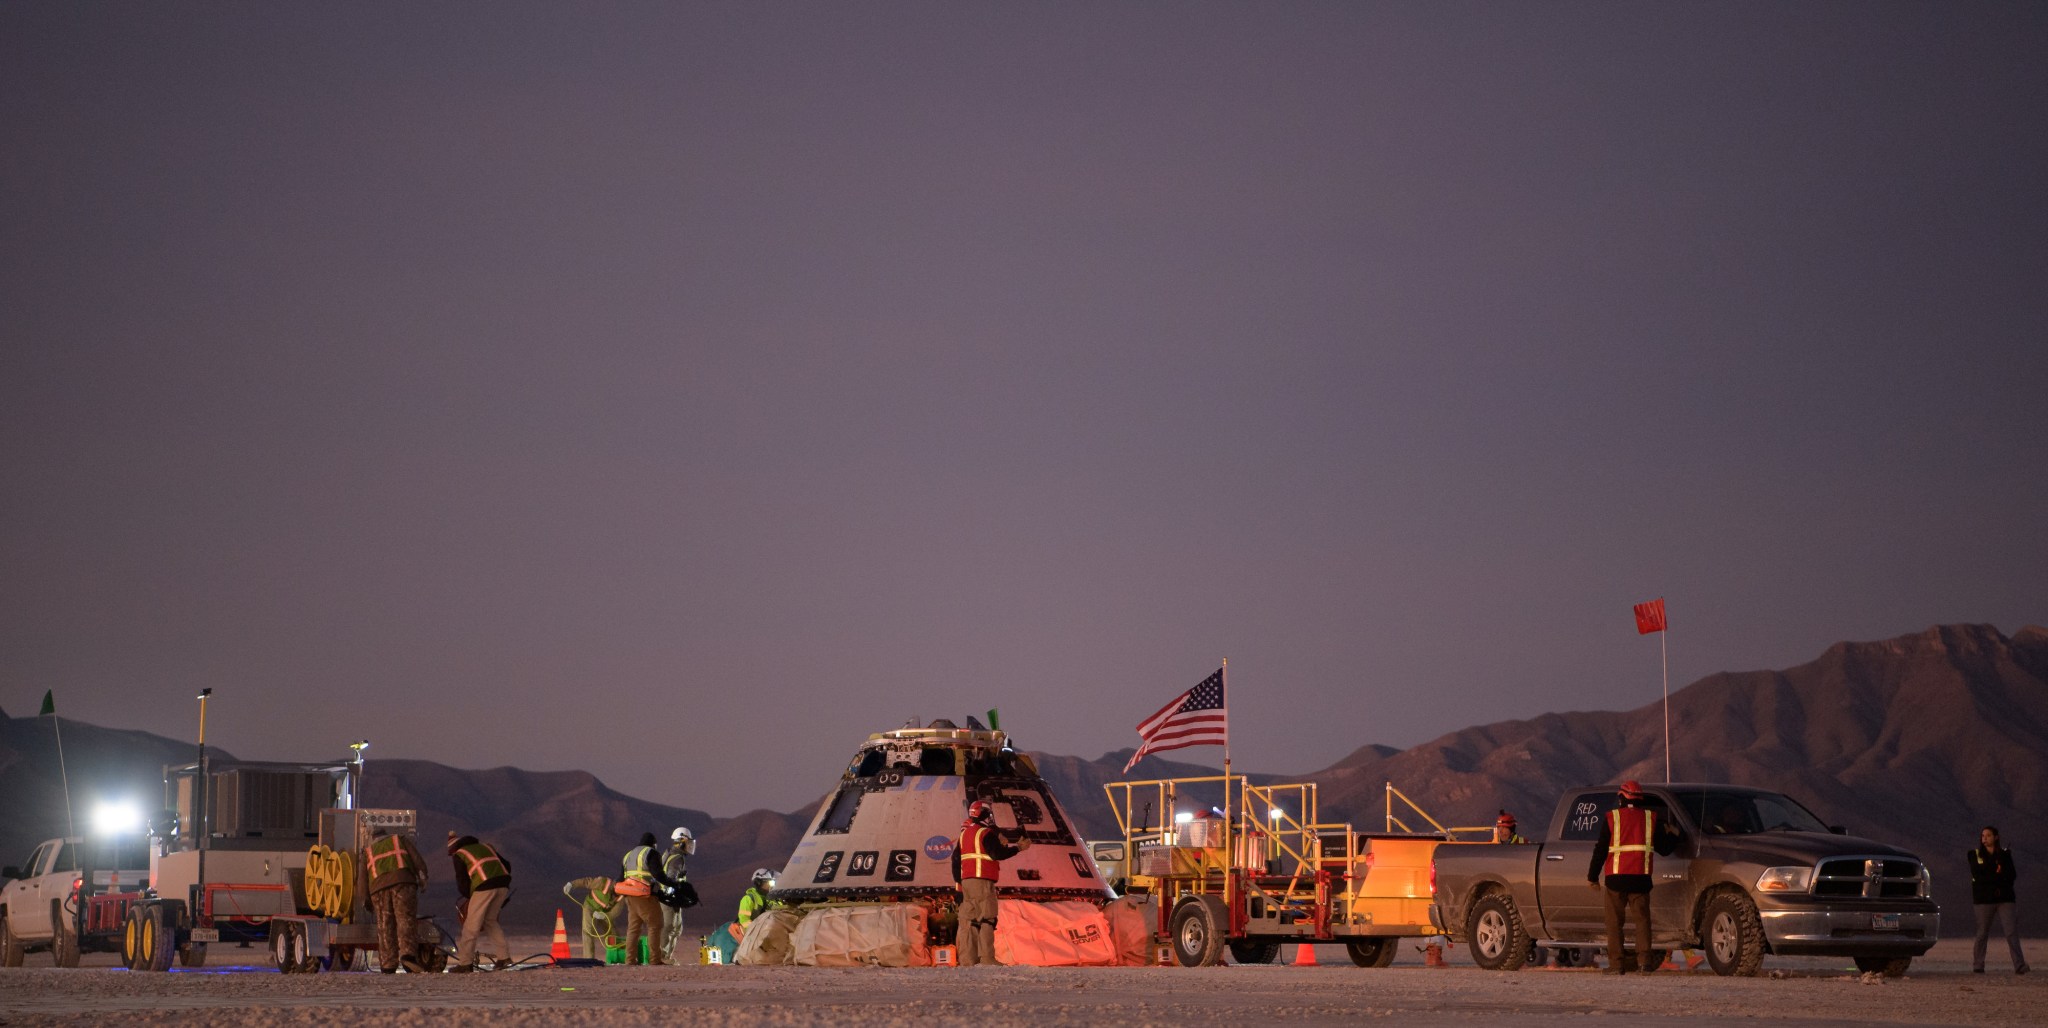 Boeing's uncrewed CST-100 Starliner spacecraft lands at White Sands Missile Range in New Mexico.